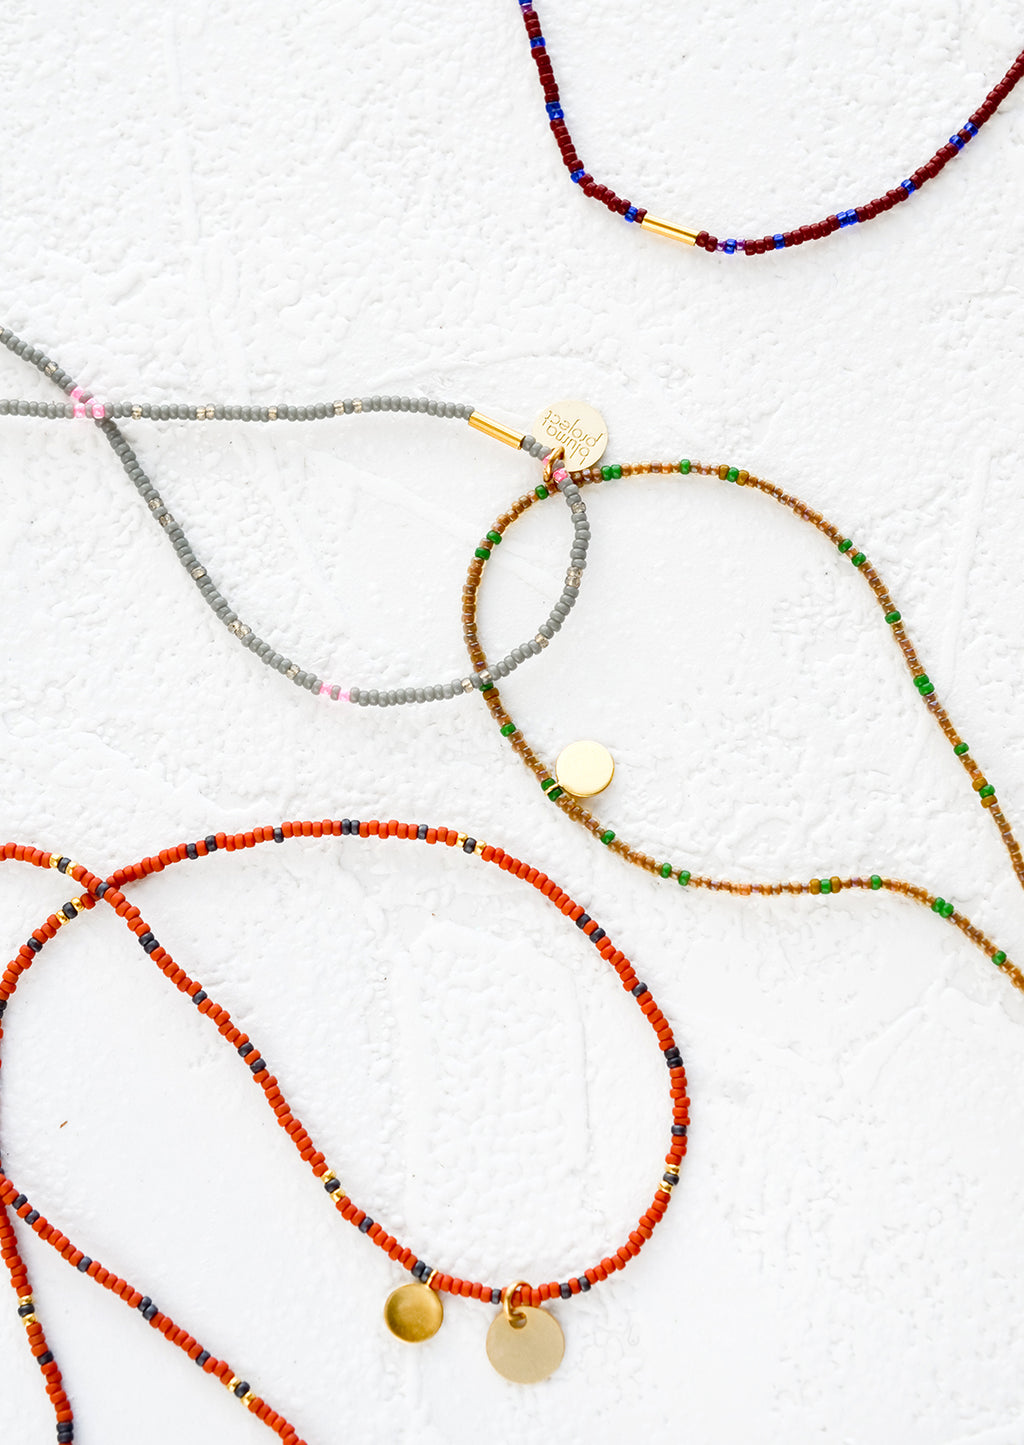 1: An assortment of choker necklaces made from multicolored seed beads